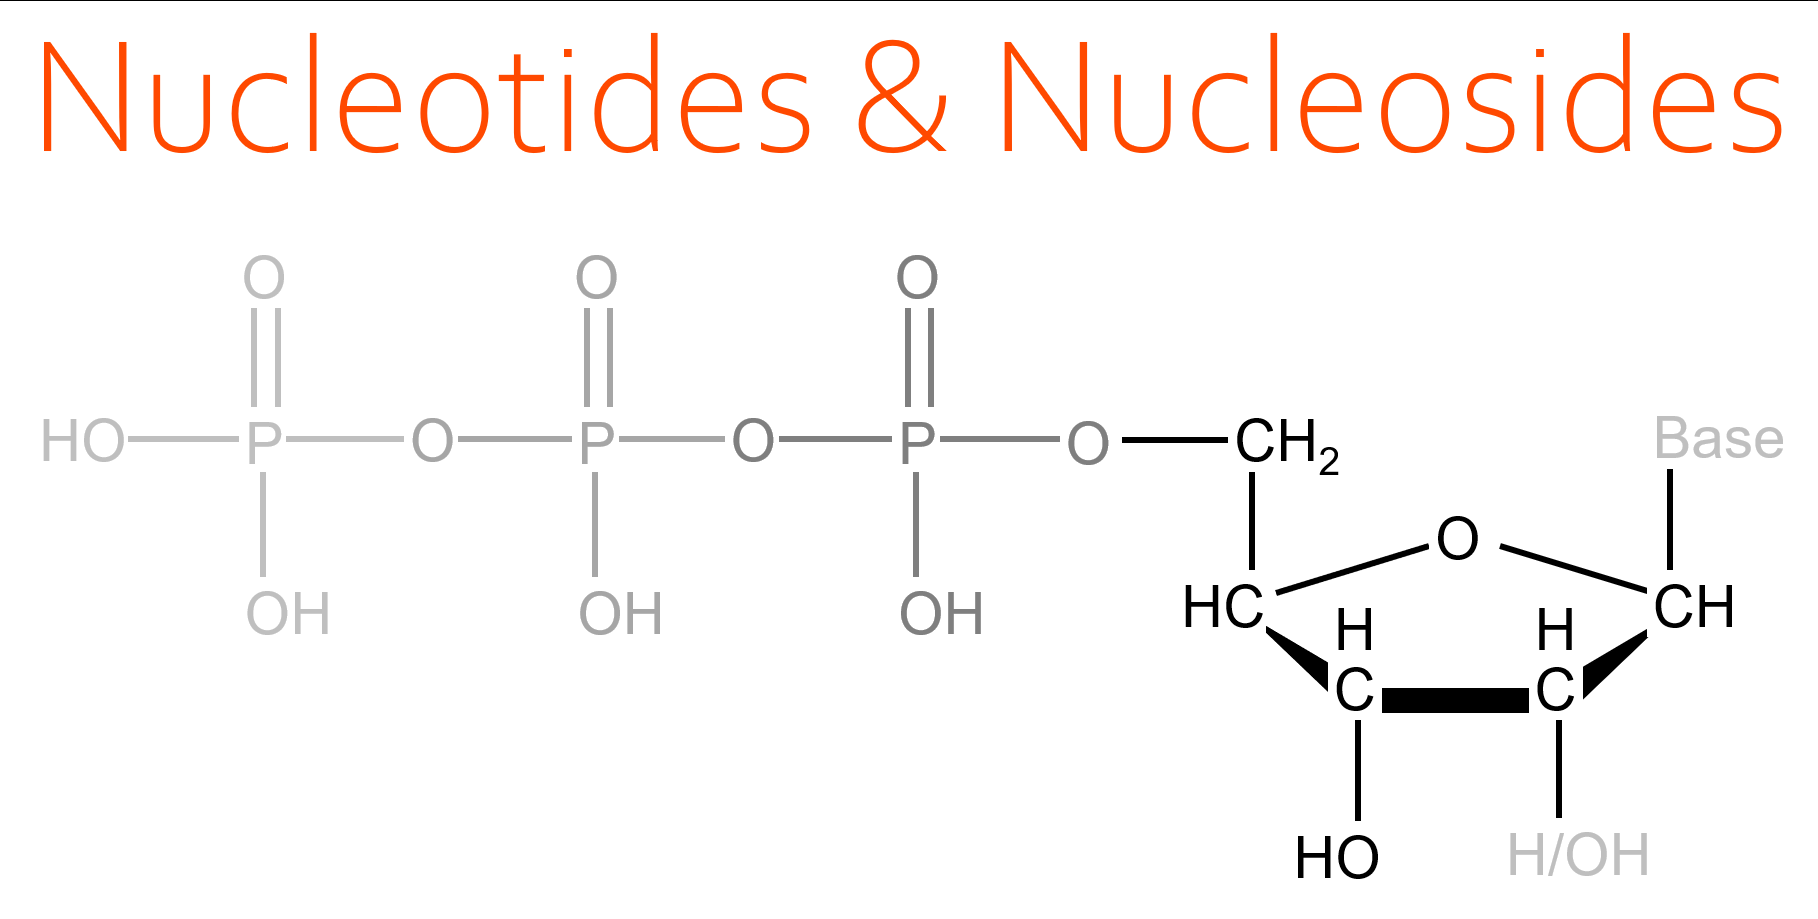 Nucleotides_and_Nucleosides_final